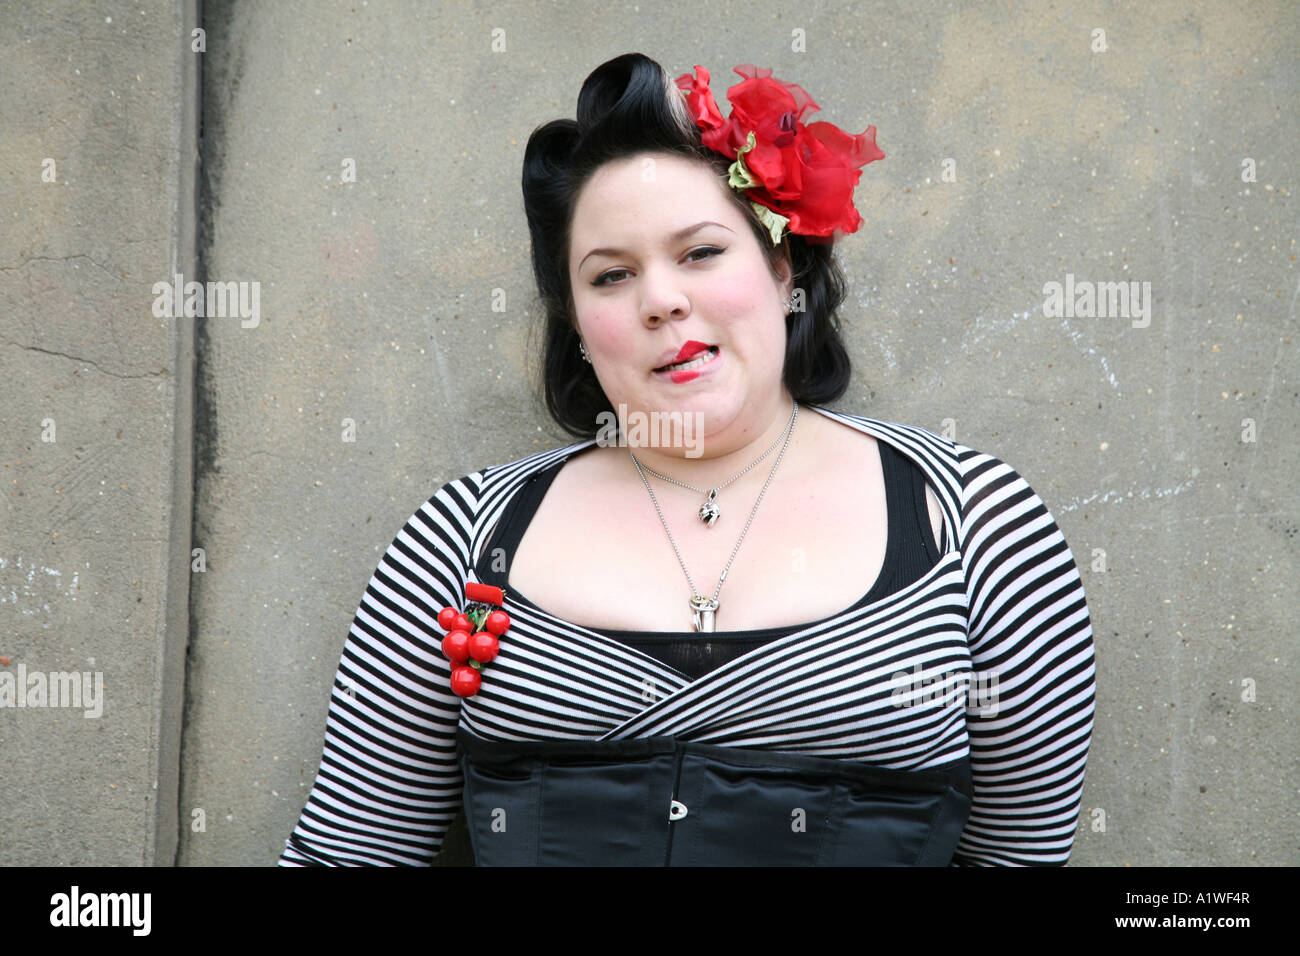 Portrait of a punk girl wearing tight clothes and red flowers, UK 2006 Stock Photo